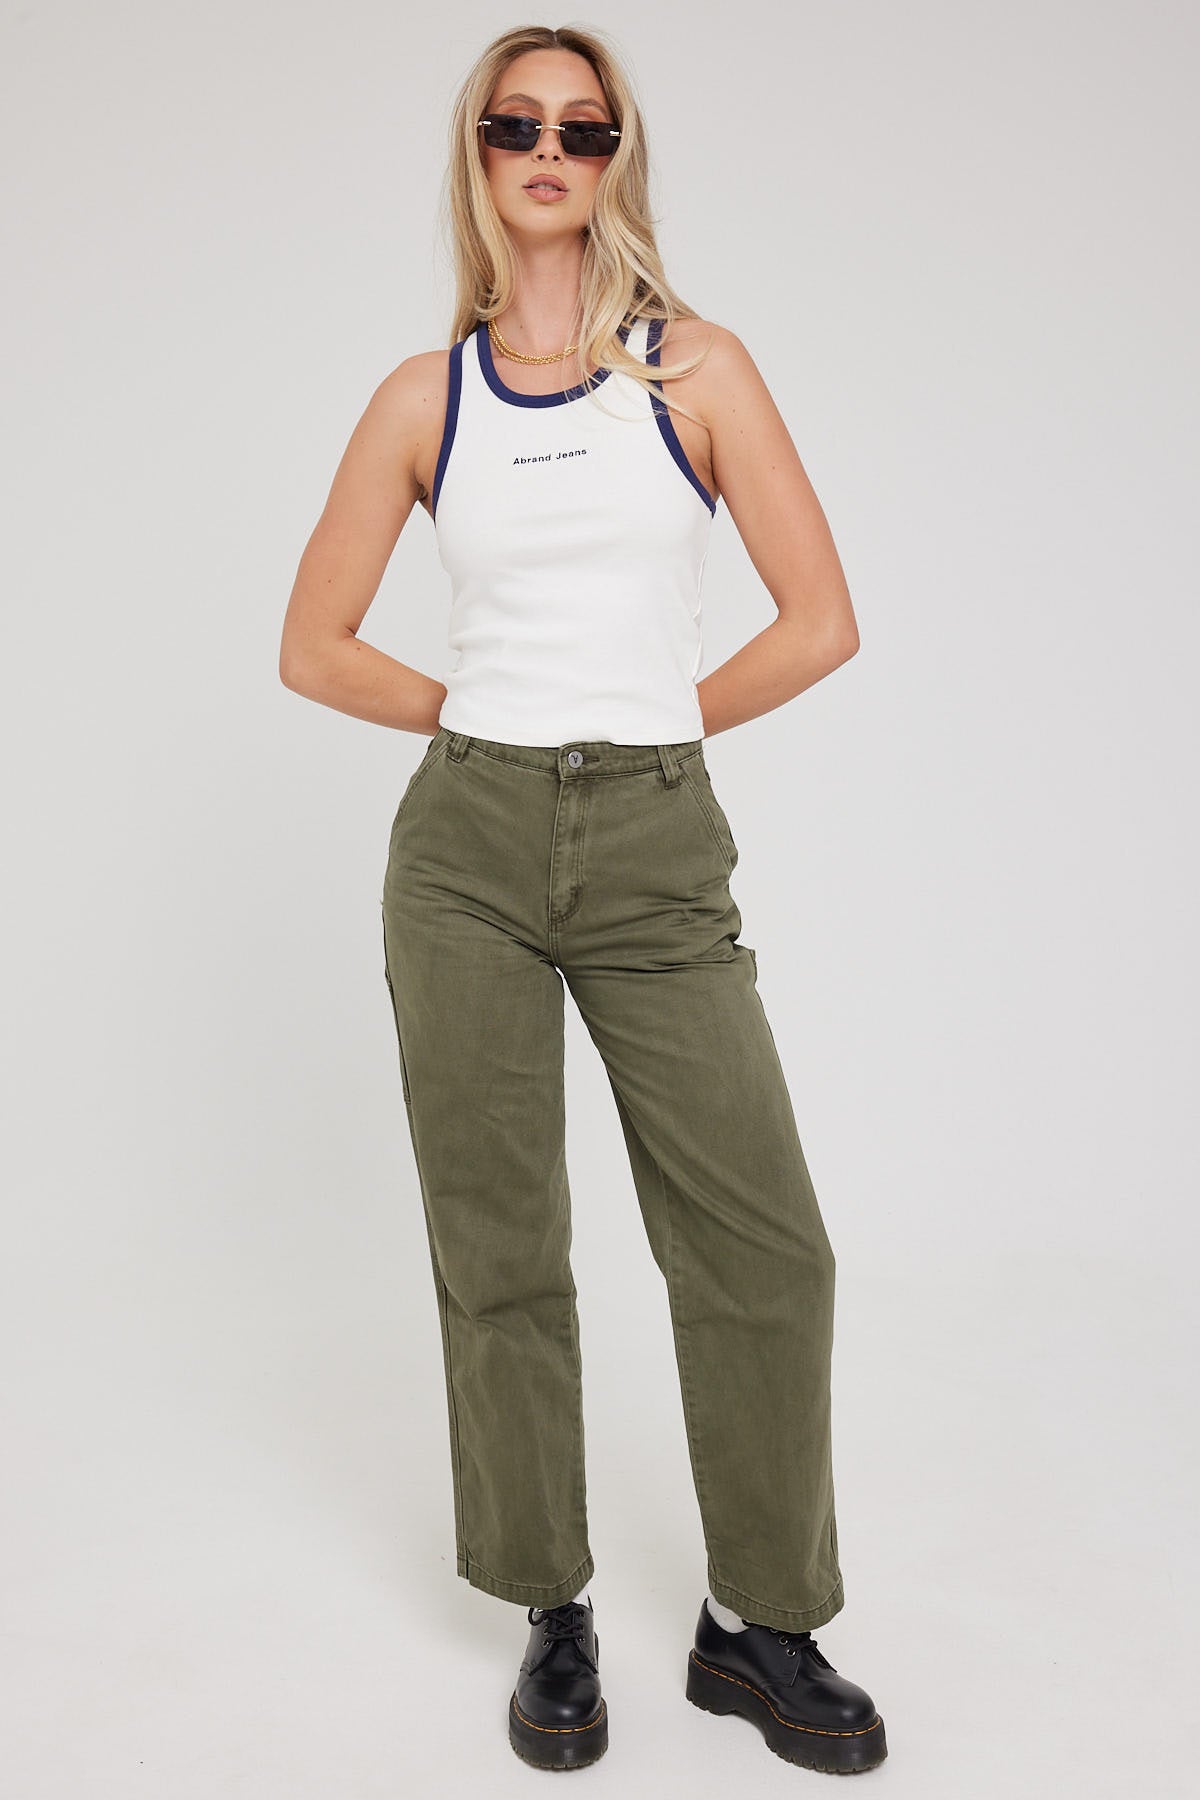 Abrand A Carrie Jean Carpenter Army Green – Universal Store